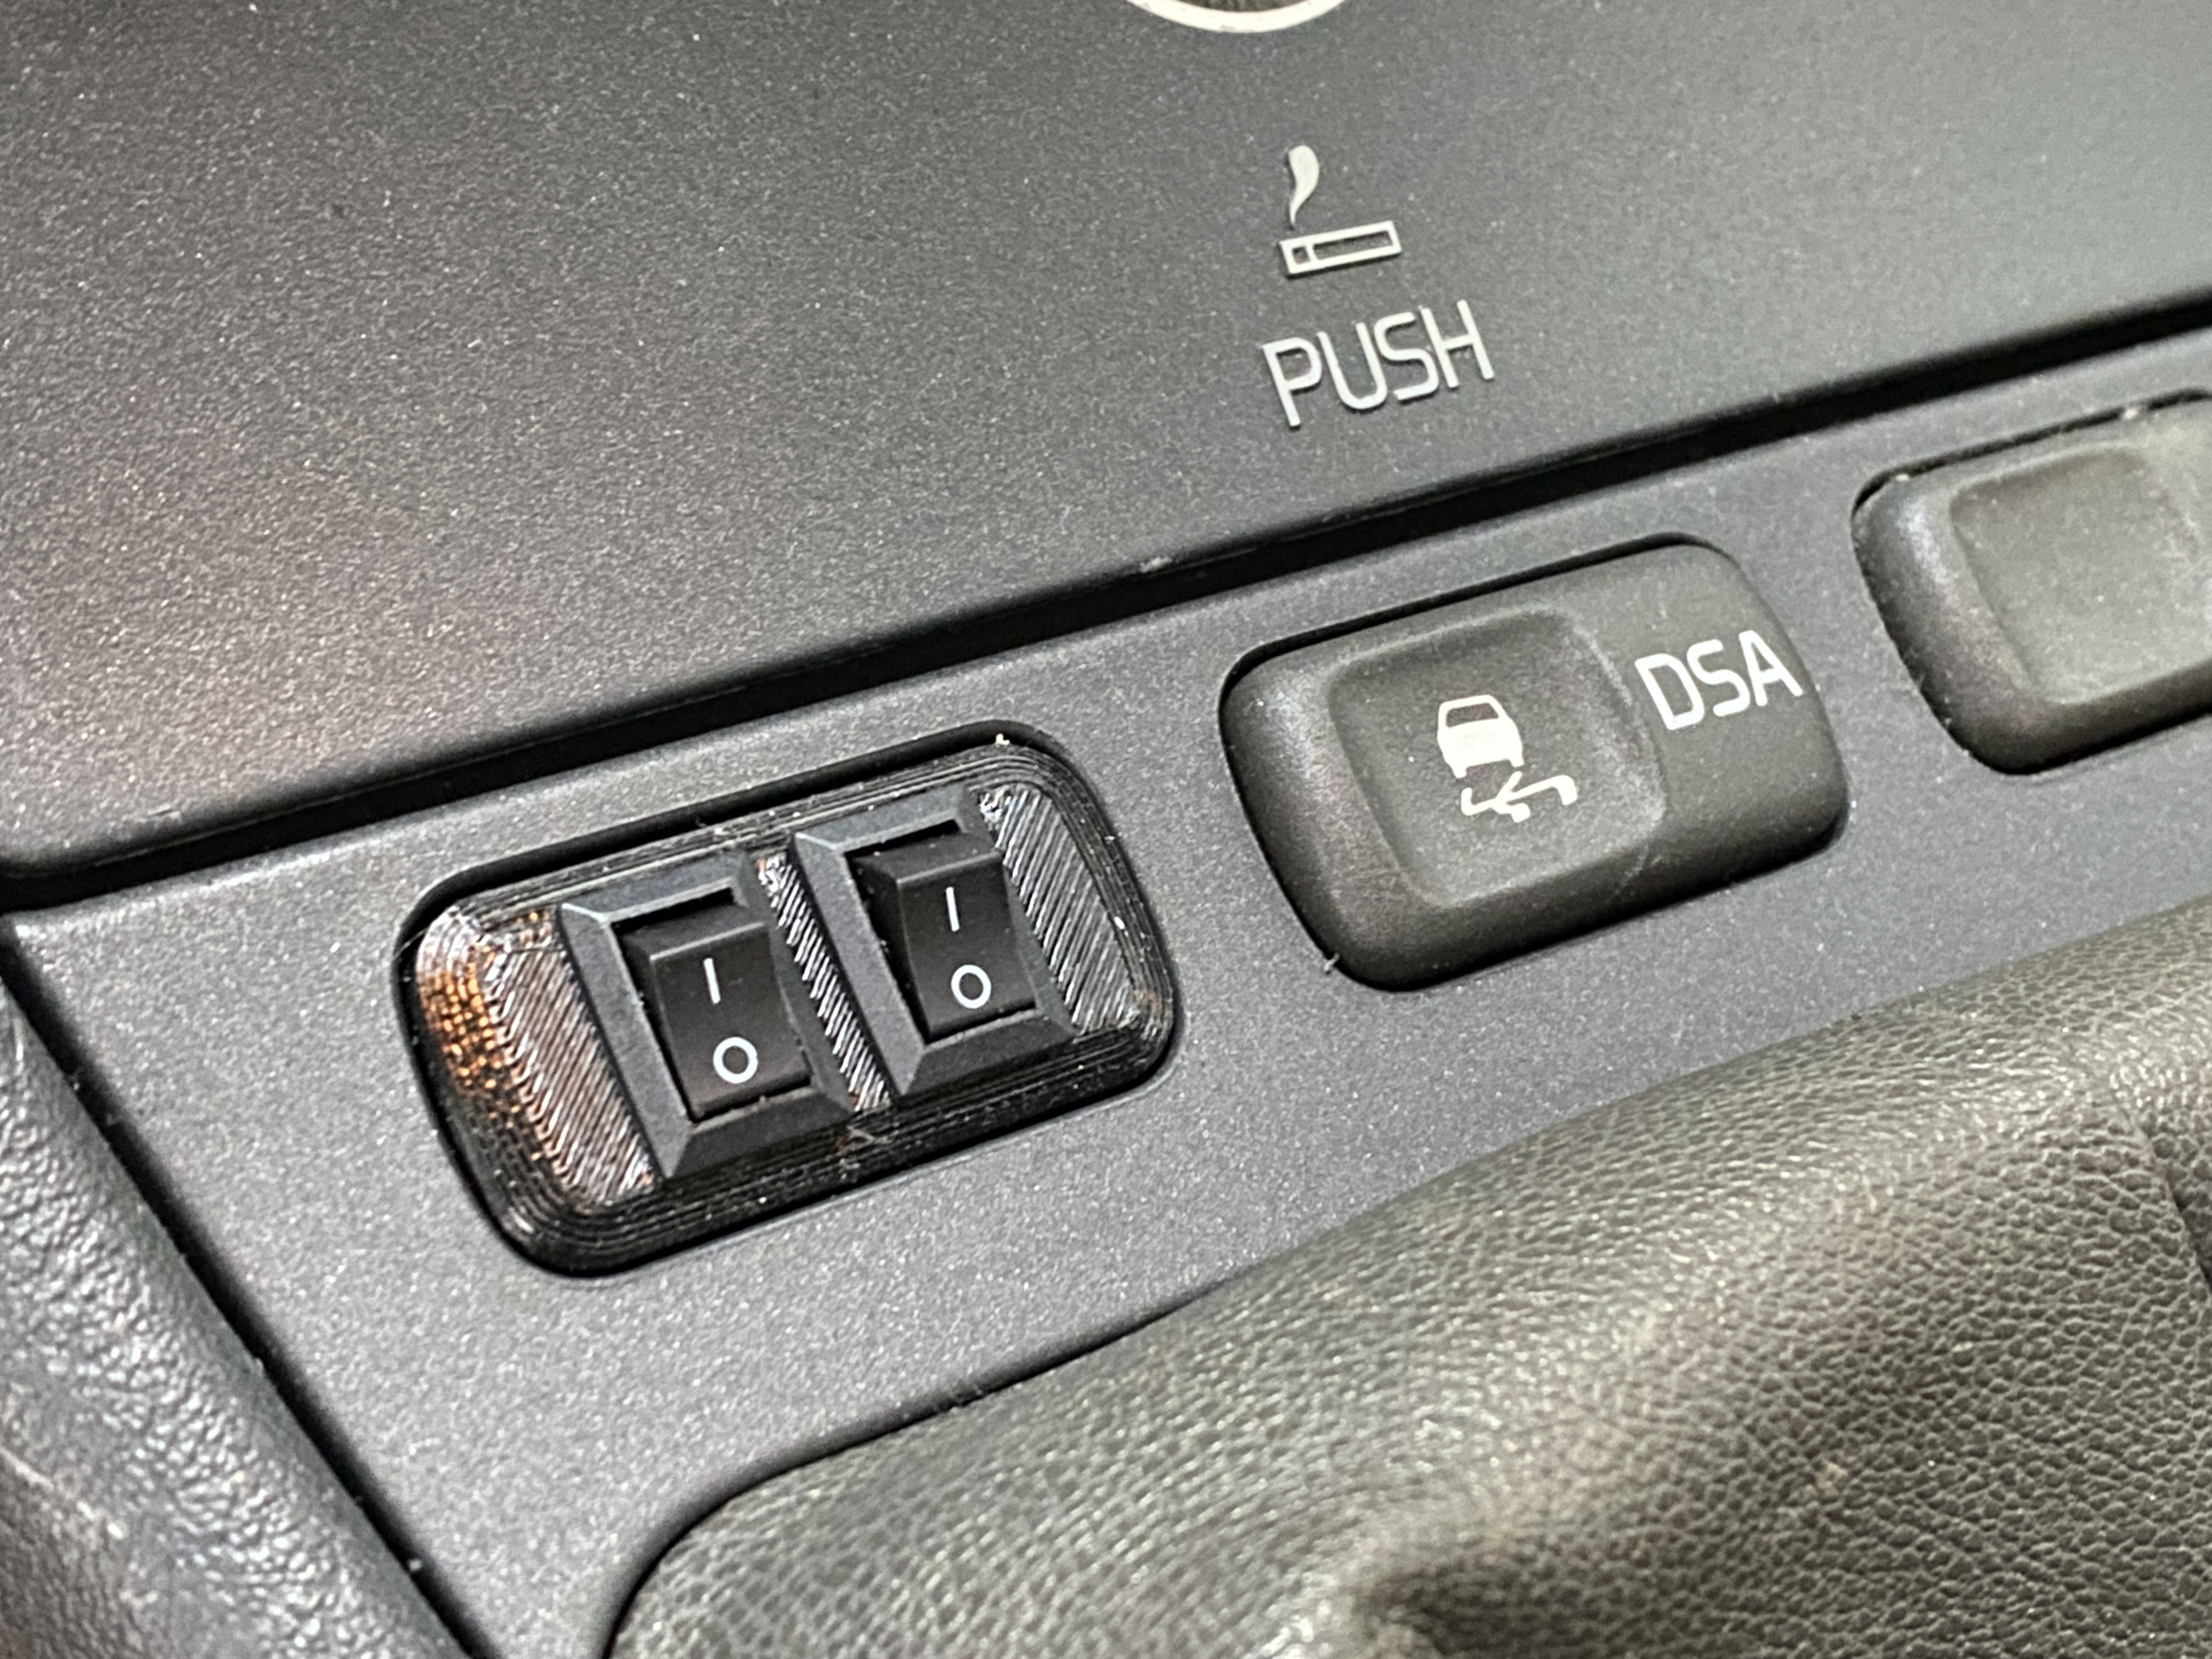 Volvo V40 (1999) button replacement